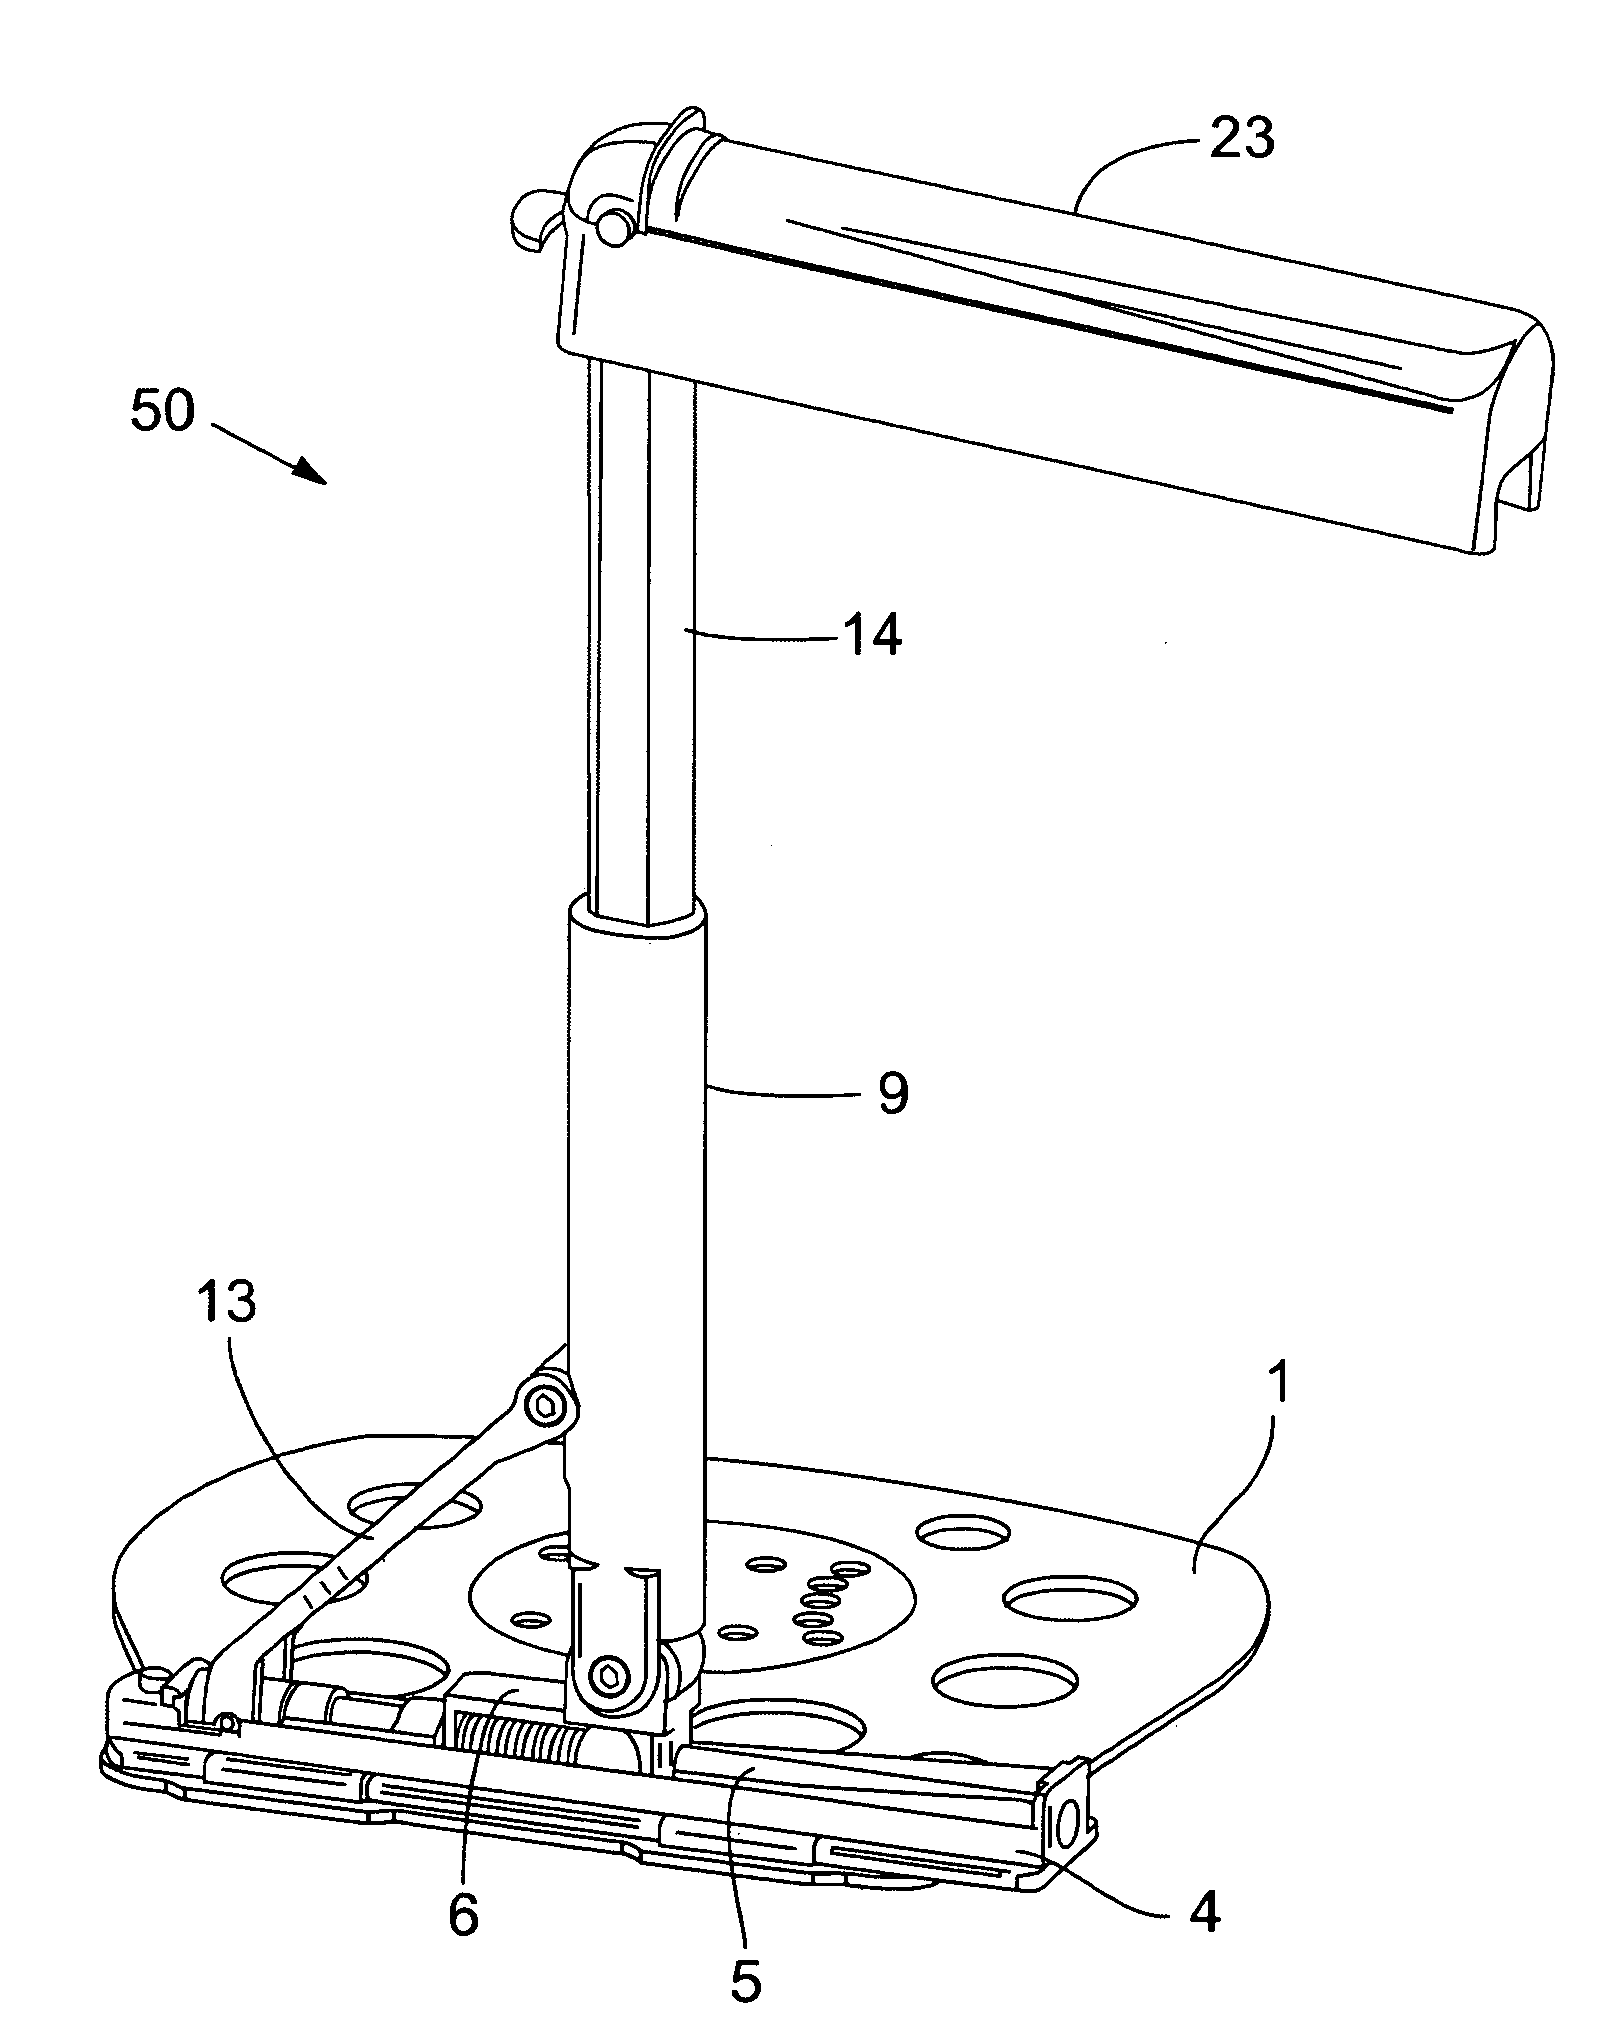 Retractable snowboard support apparatus for use in lift assist transport